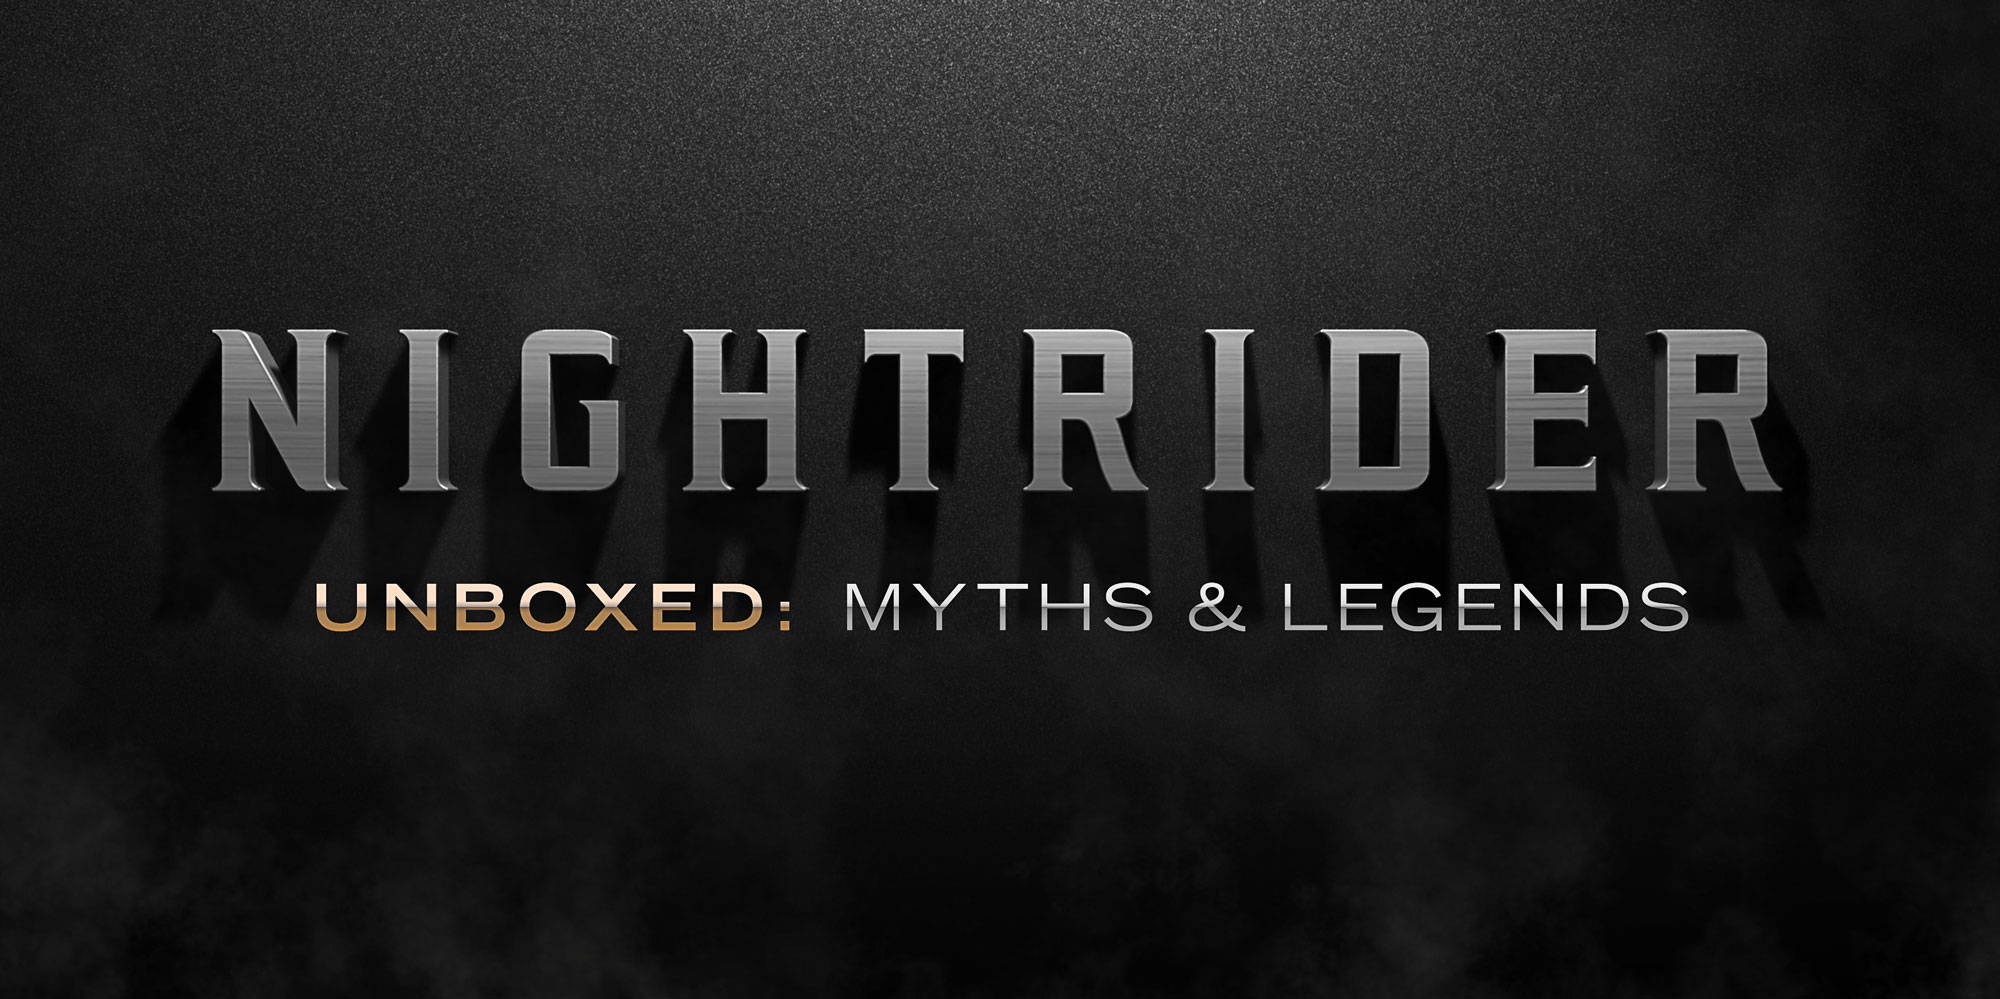 NightRider Unboxed: Myths & Legends